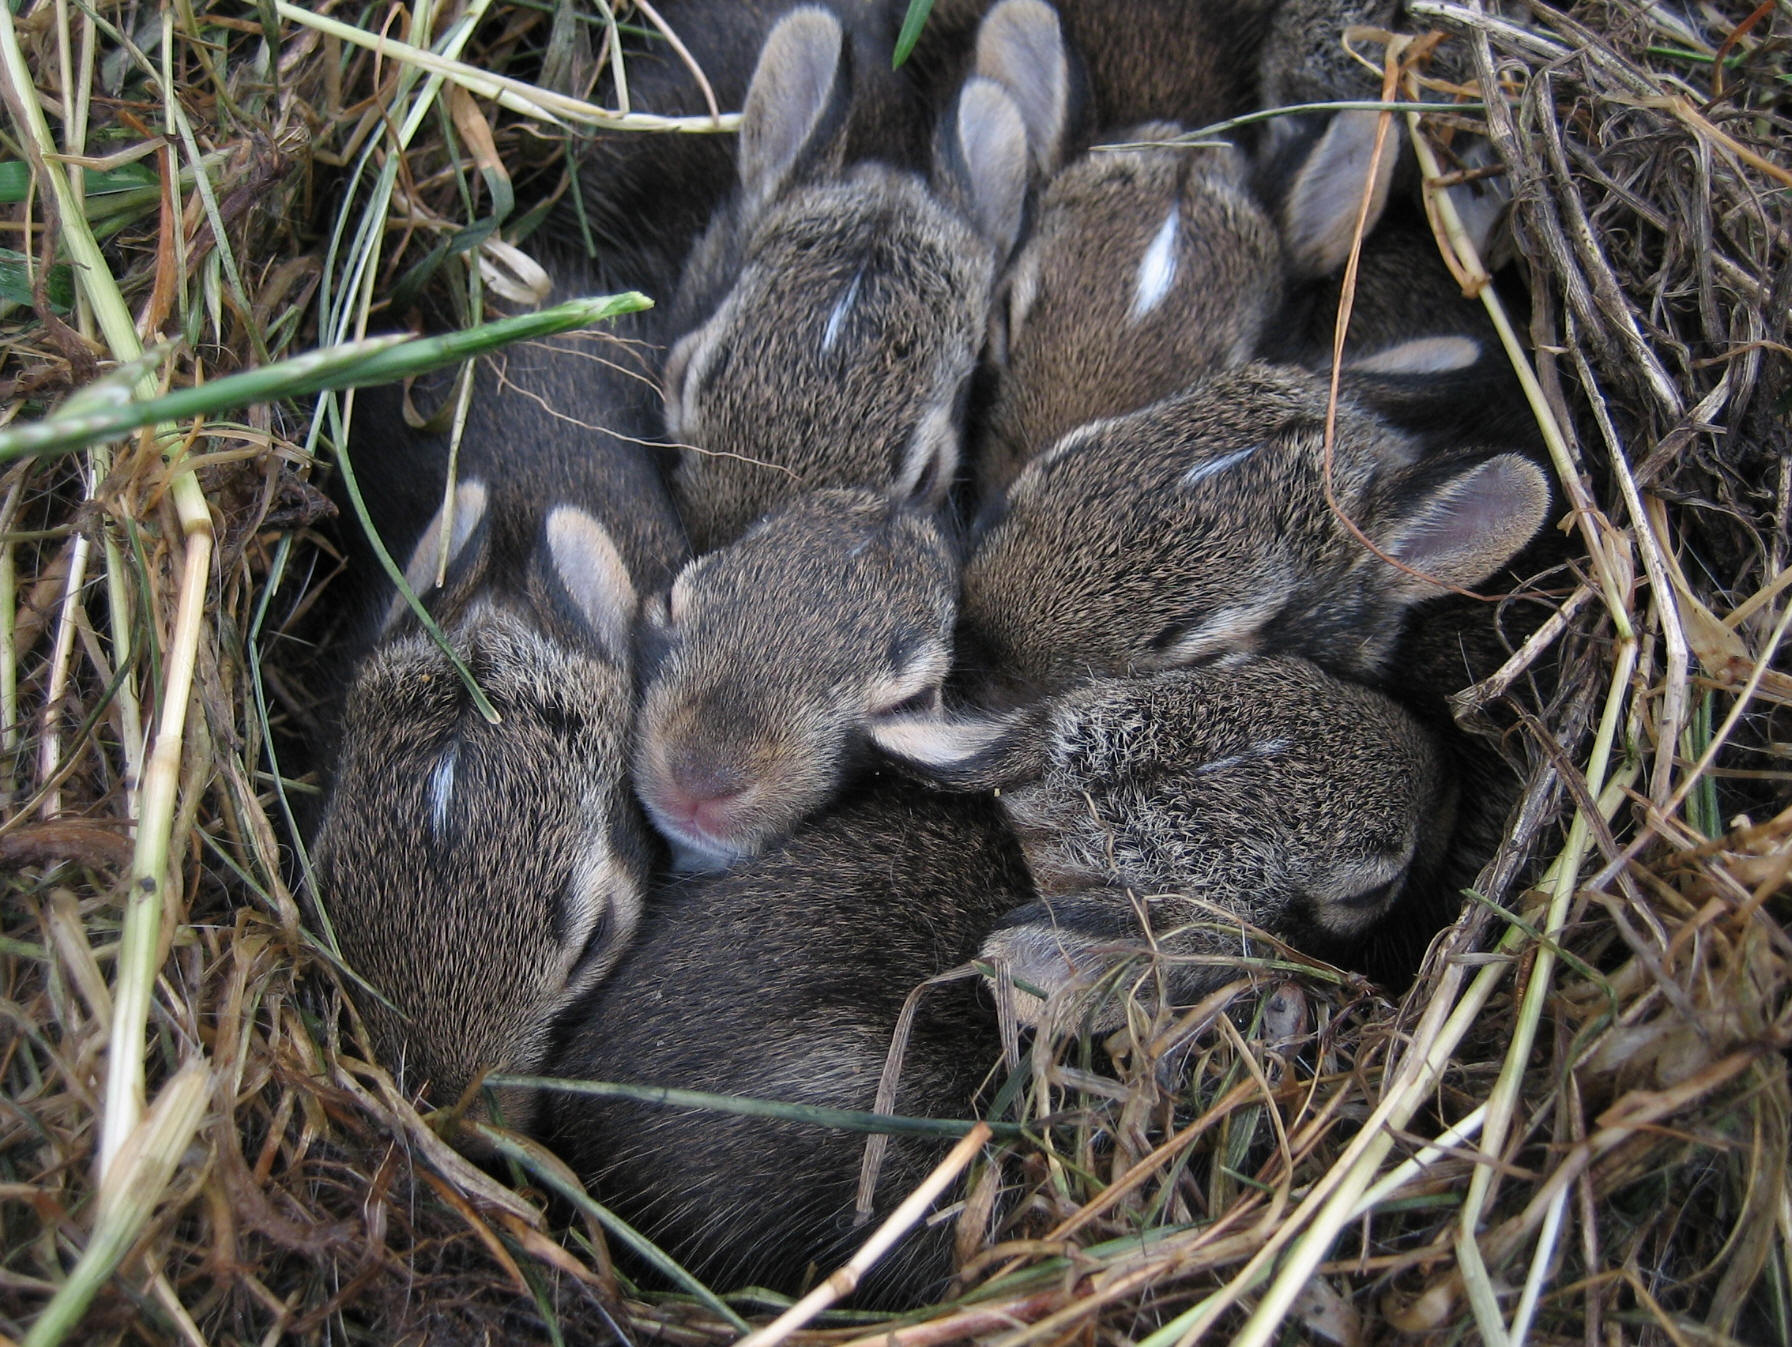 Caring for Orphaned and Sick Wildlife